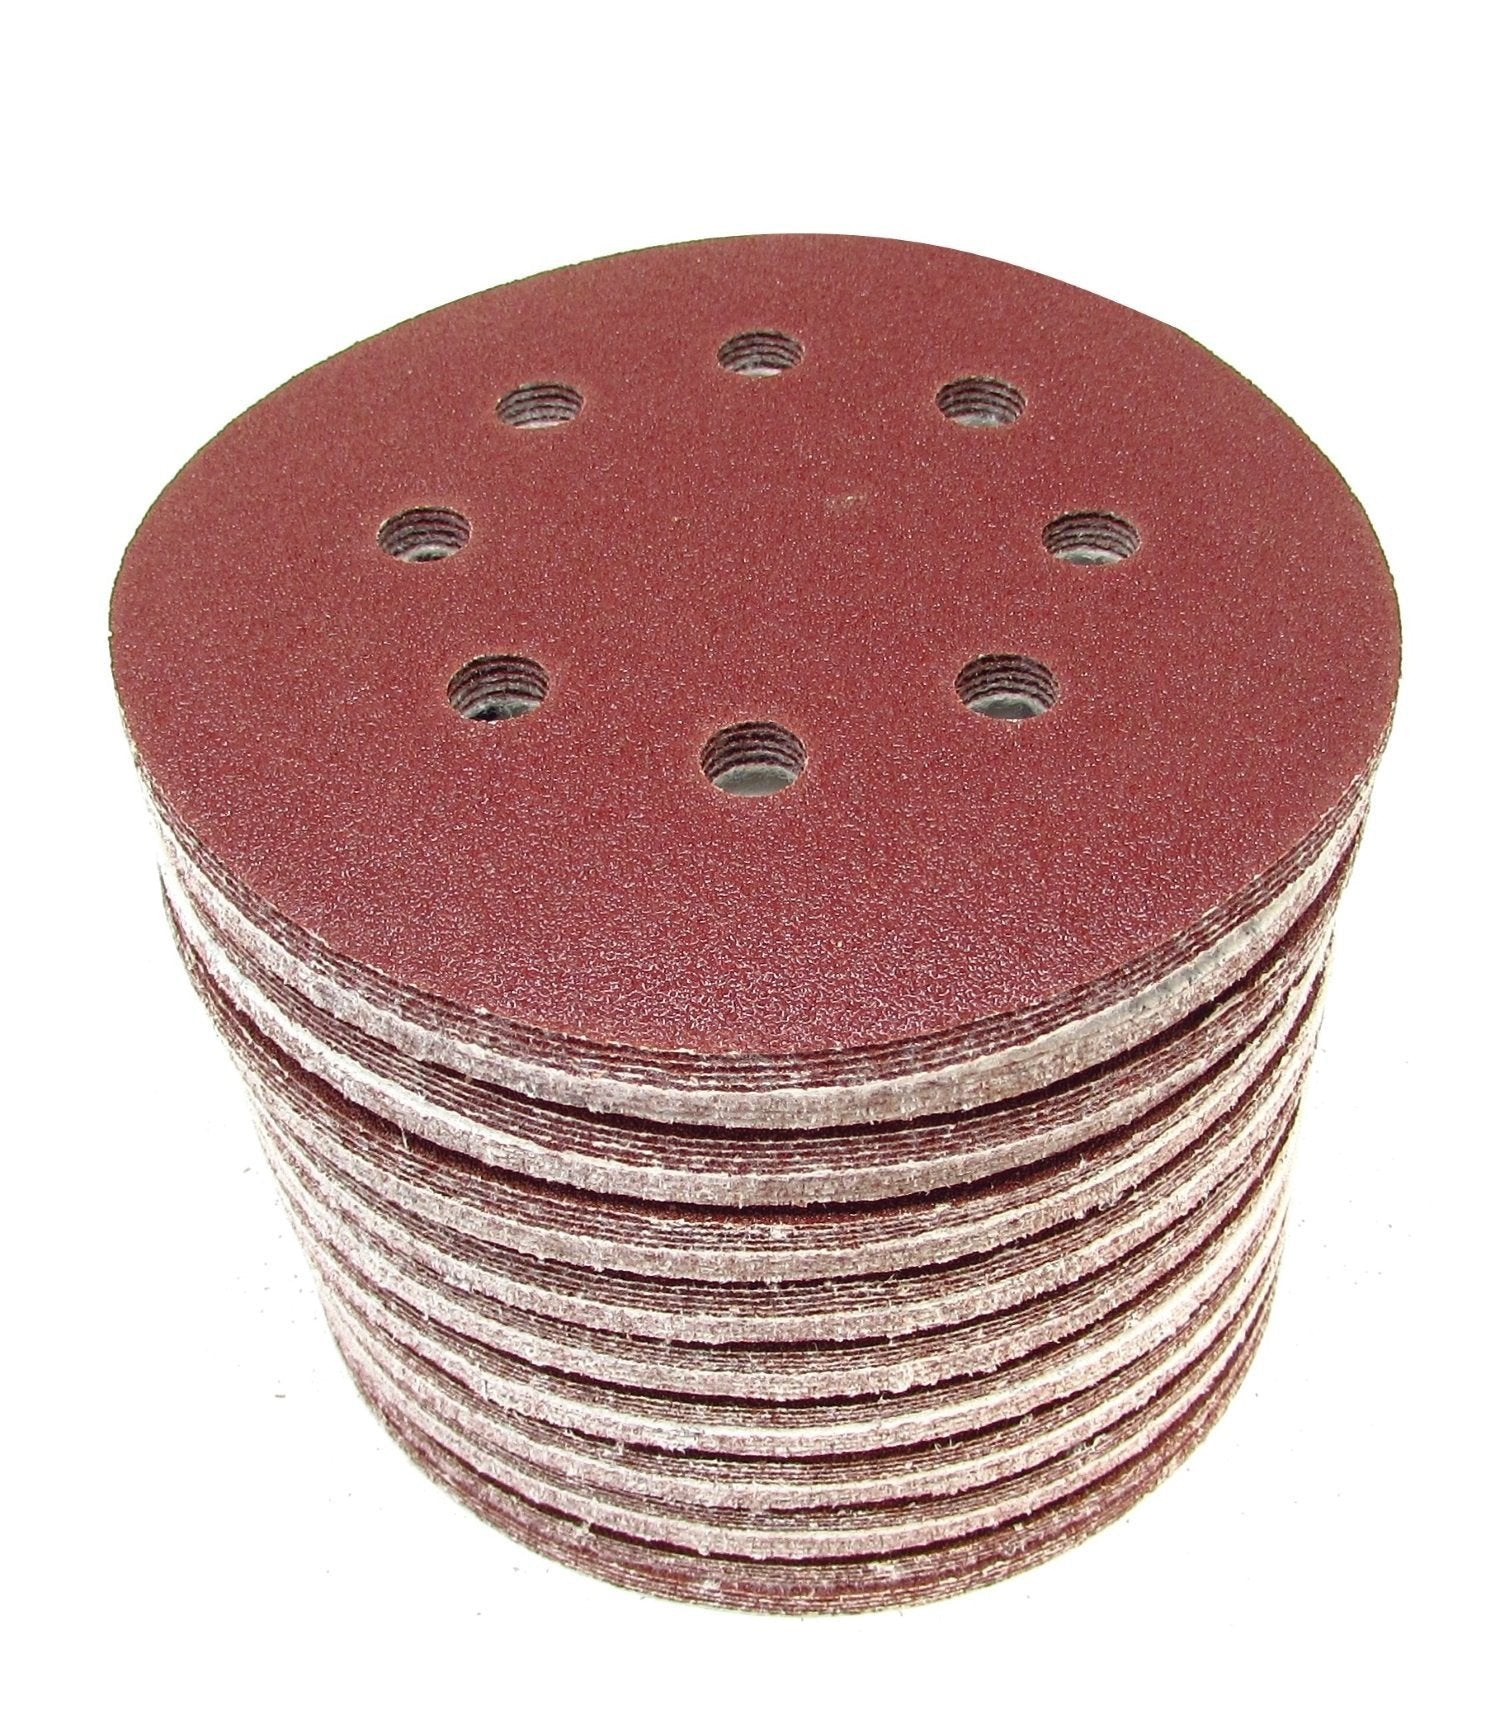 Buy Sanding Disc 10in. at Busy Bee Tools